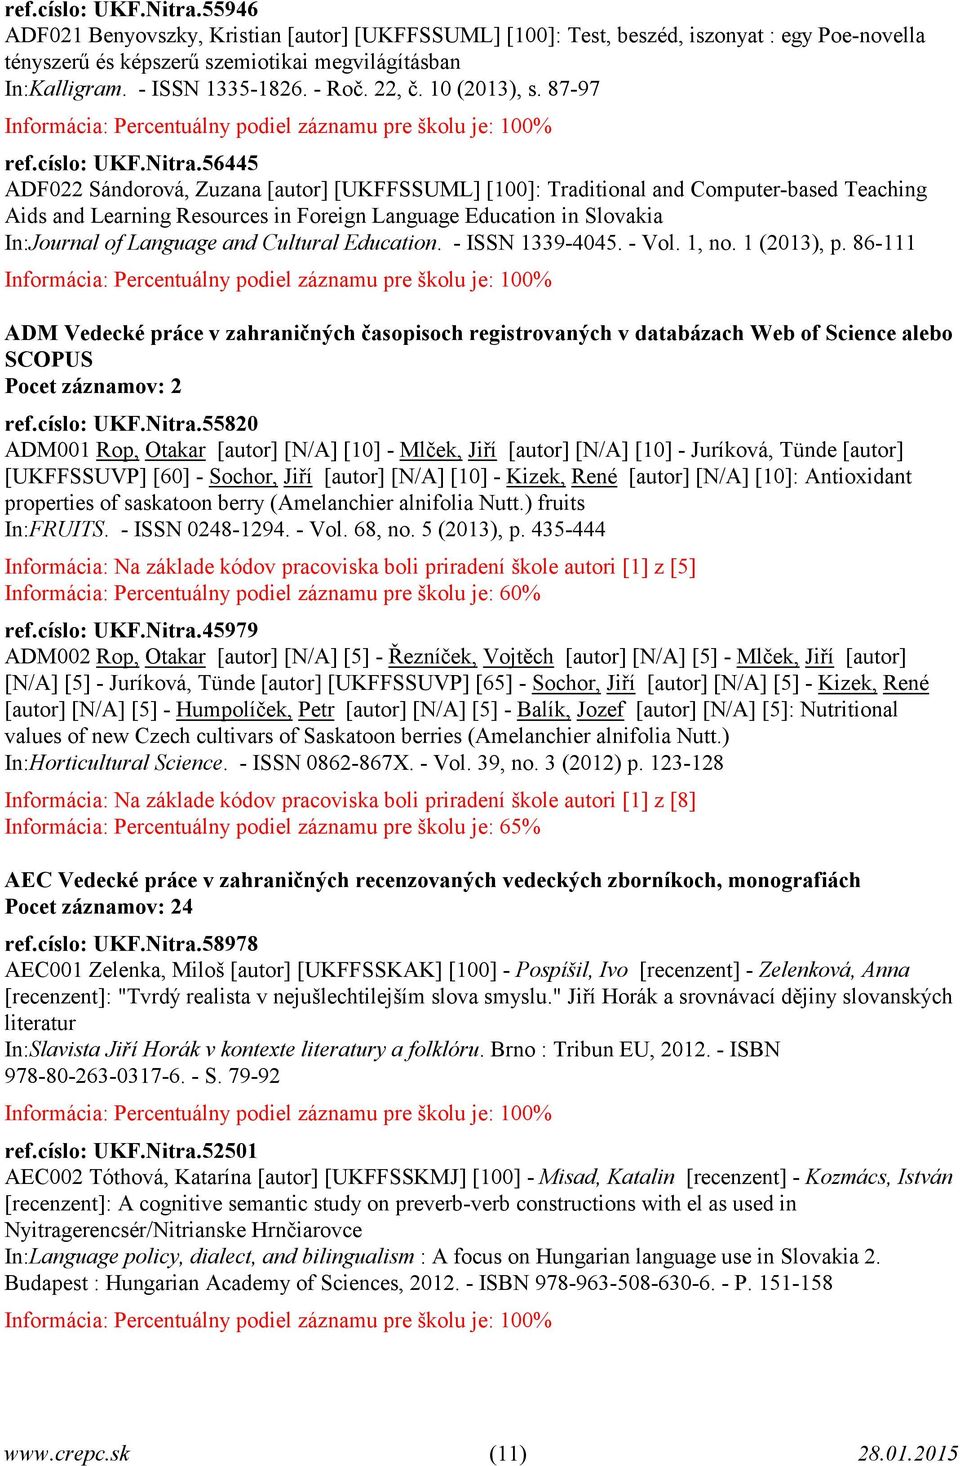 56445 ADF022 Sándorová, Zuzana [autor] [UKFFSSUML] [100]: Traditional and Computer-based Teaching Aids and Learning Resources in Foreign Language Education in Slovakia In:Journal of Language and